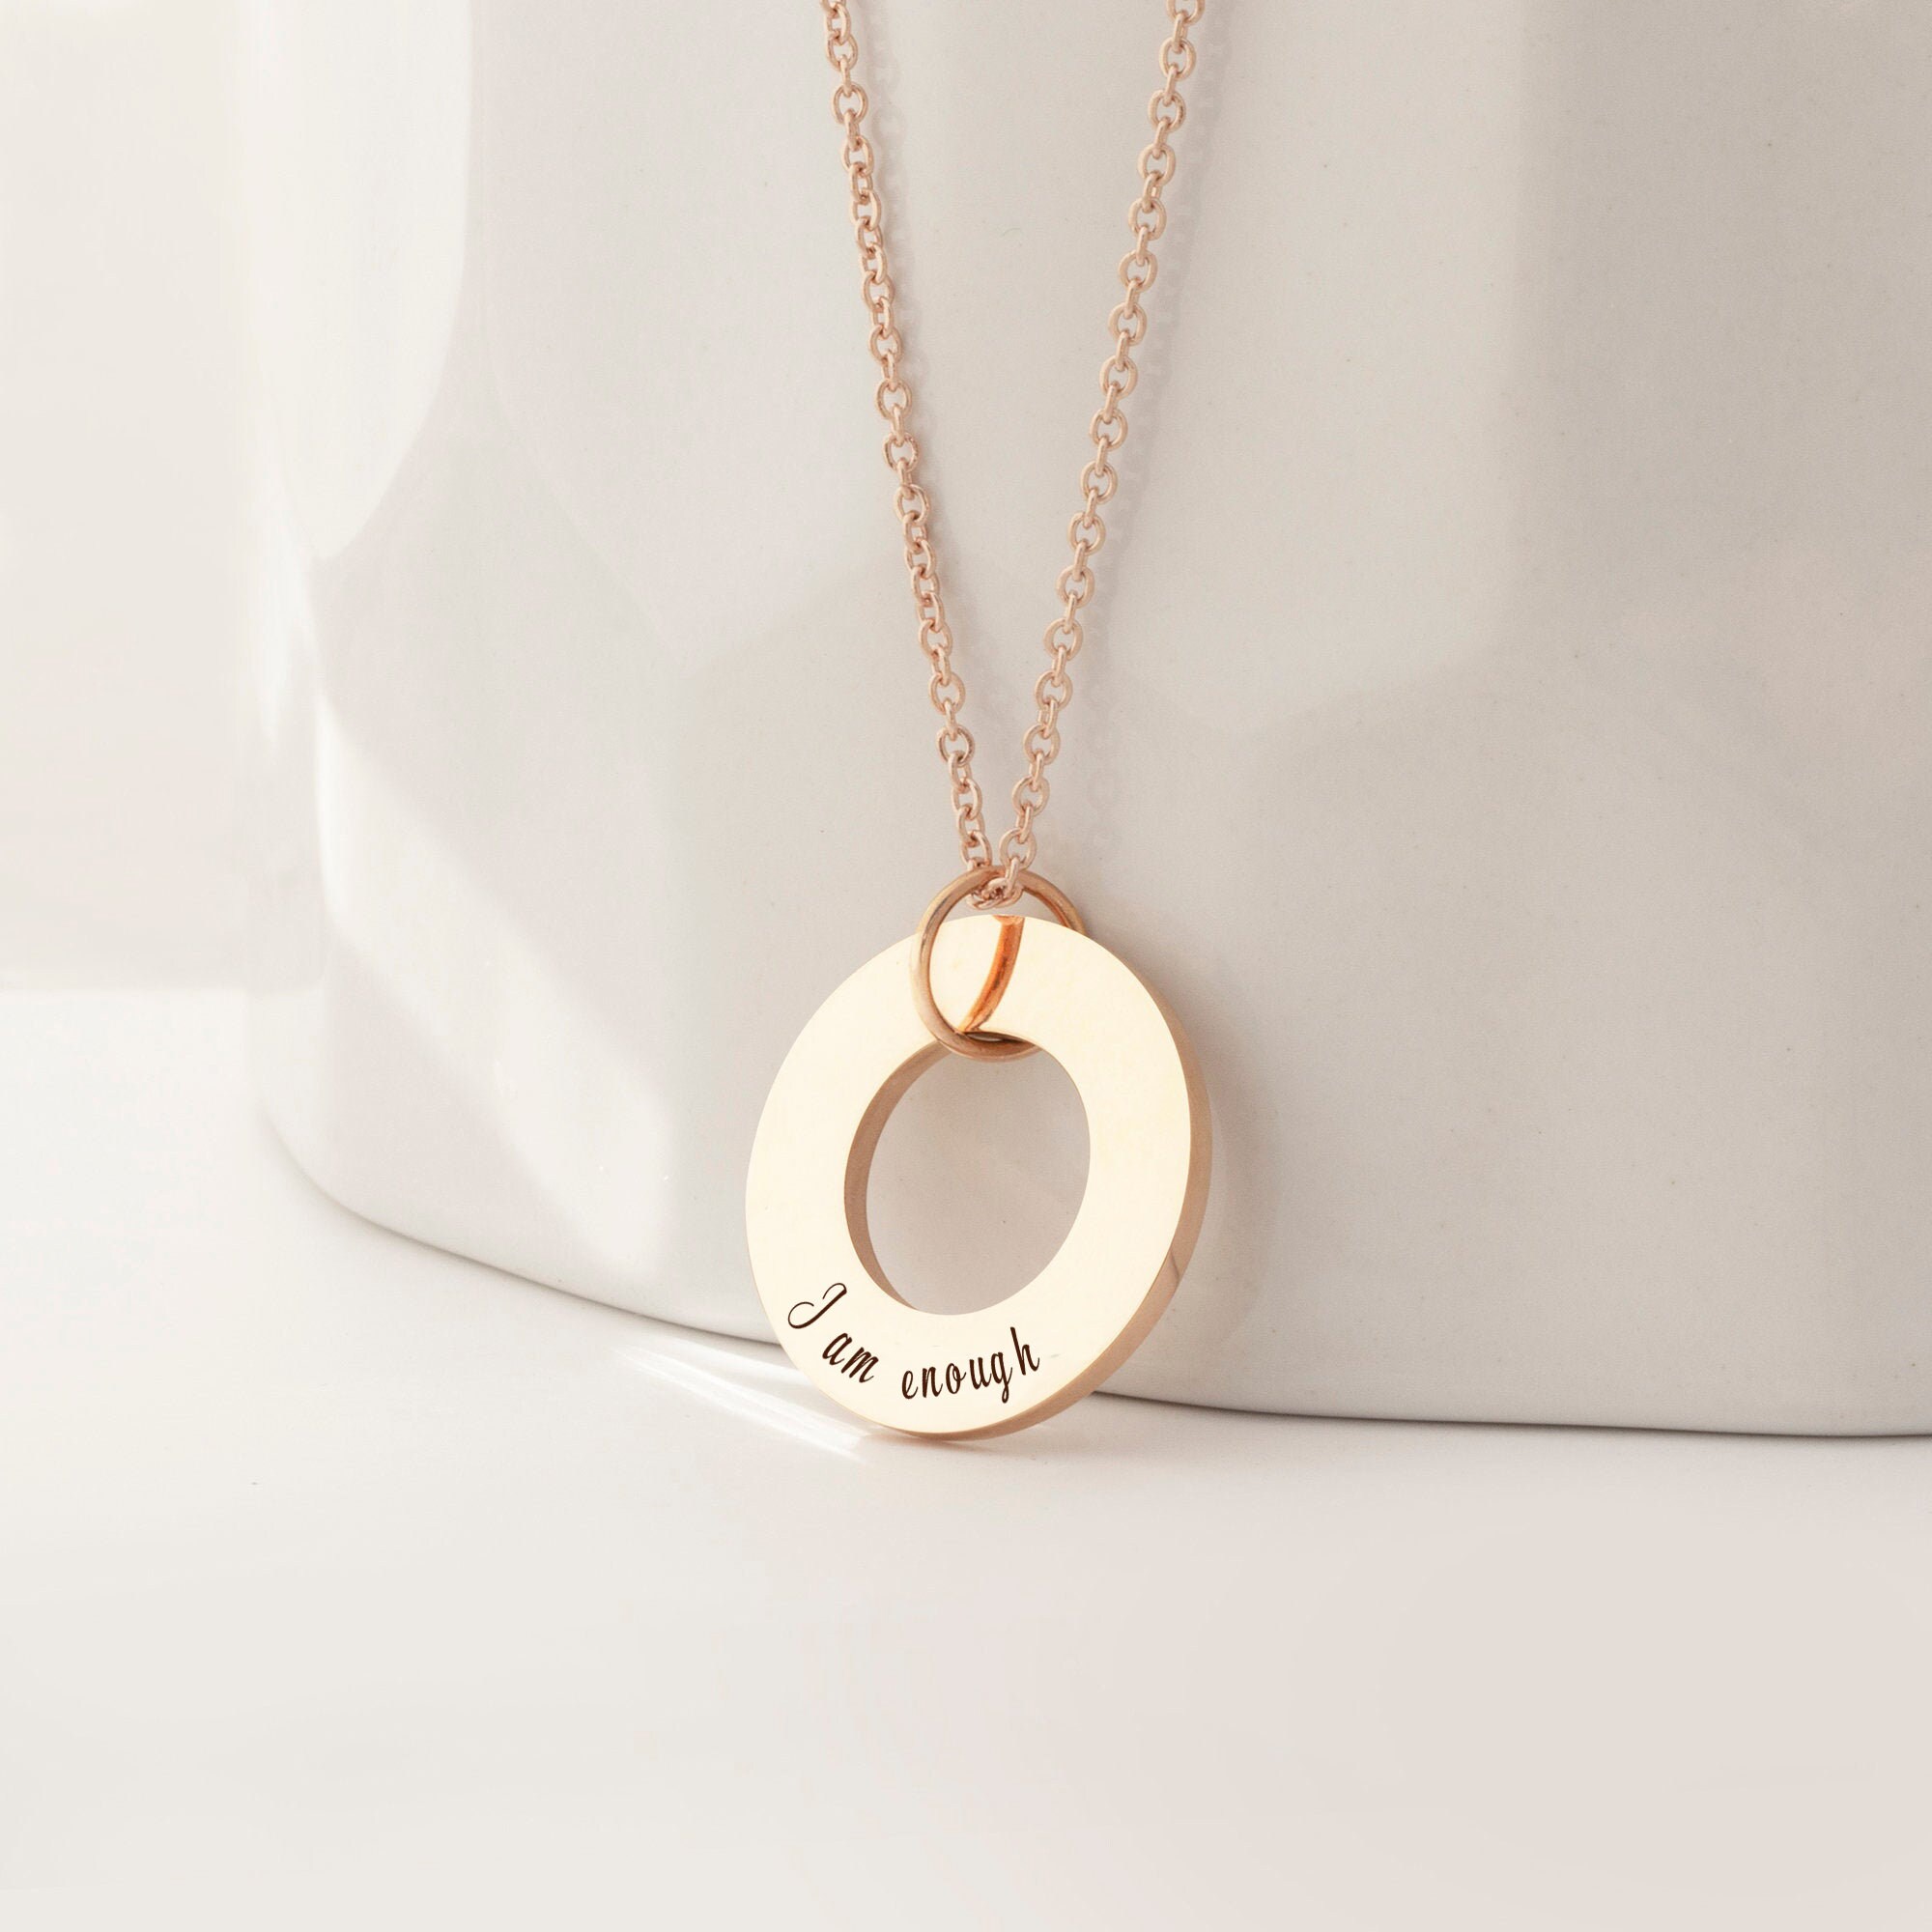 Buy I Am Enough Inspirational Gold Pendant Necklace Motivational  Reassurance Jewellery 18mm X 25mm Online in India - Etsy